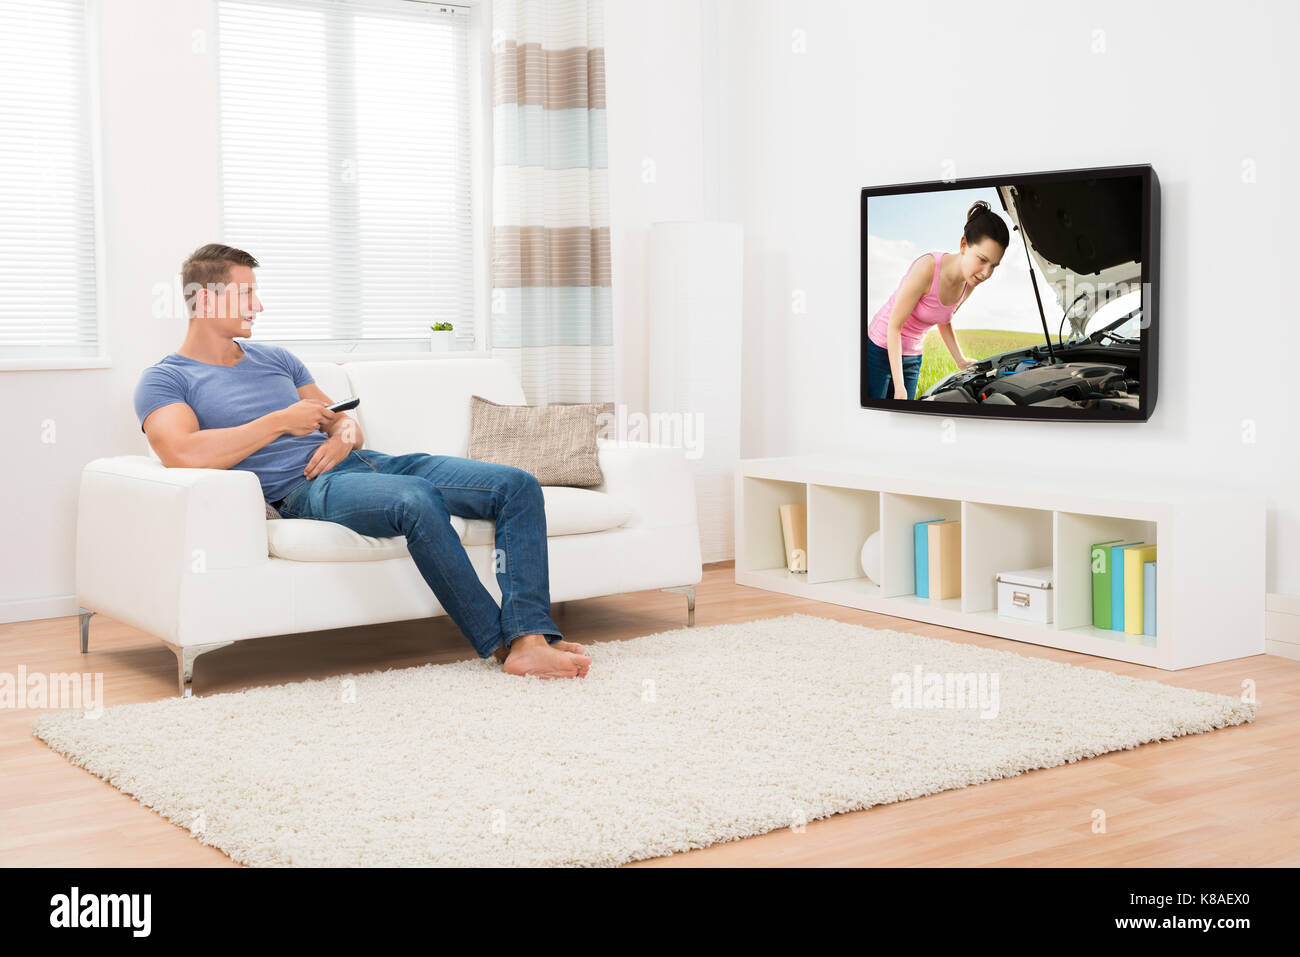 Young Man With Remote Control Watching Television In Living Room Stock Photo